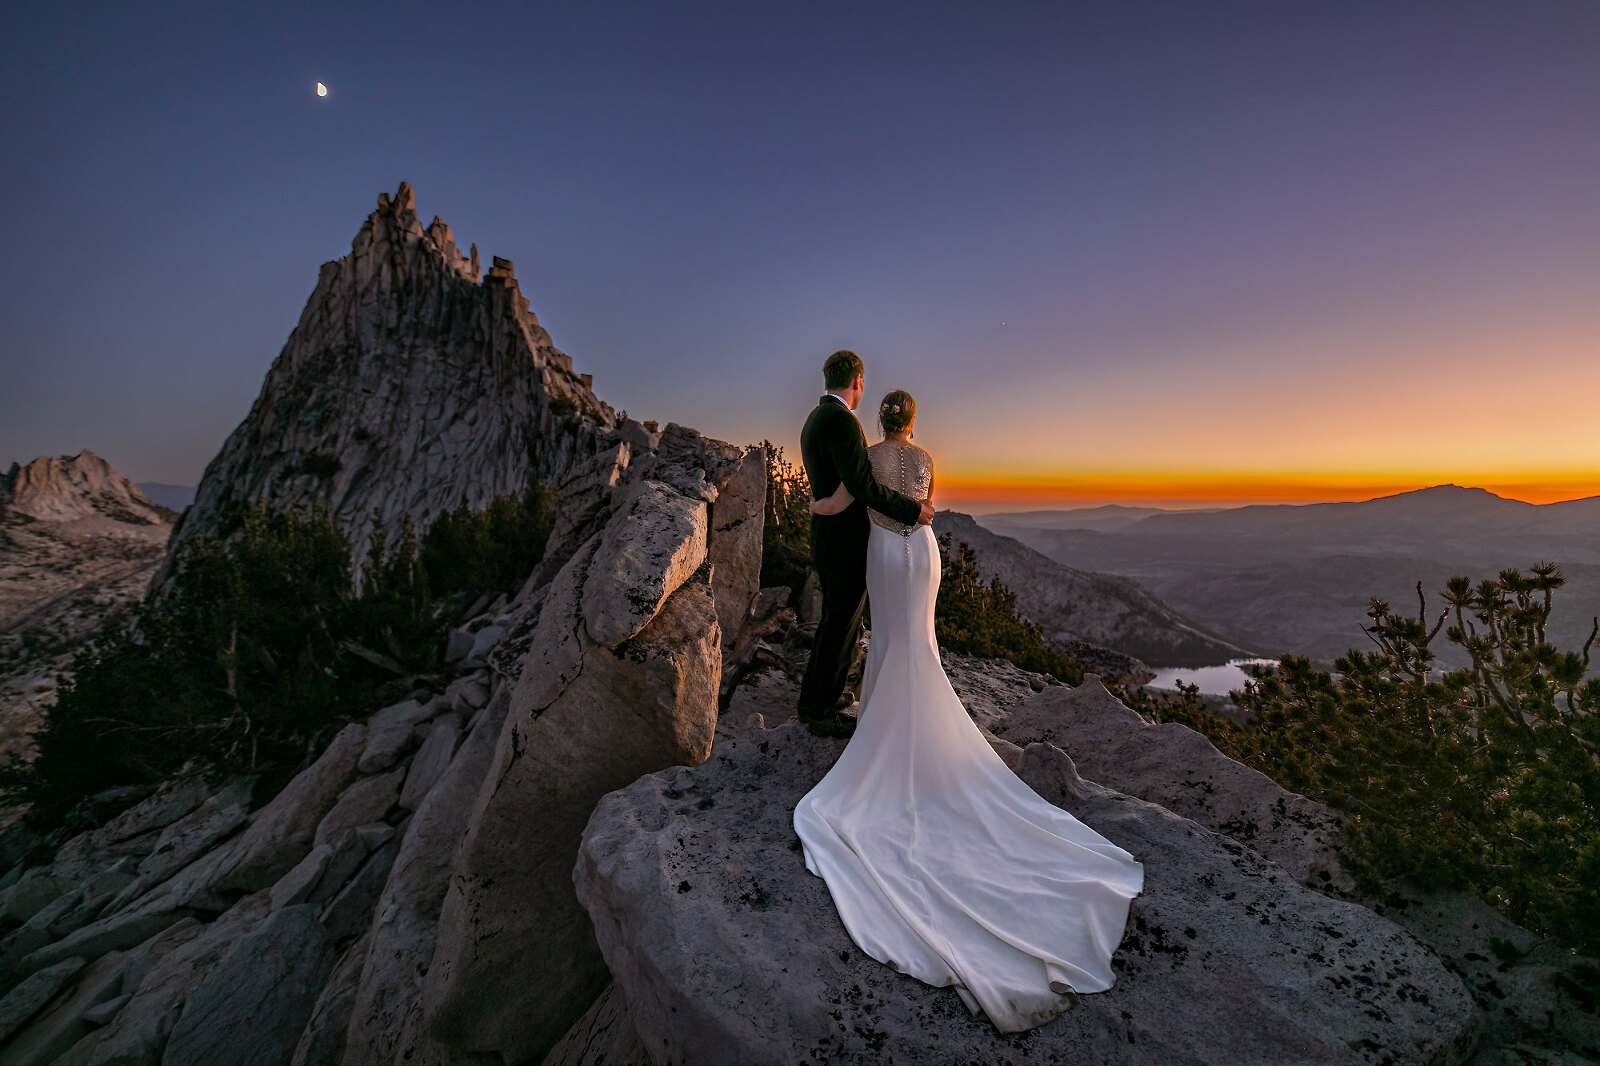 A wedding couple on top of mountain with sunset and moon.